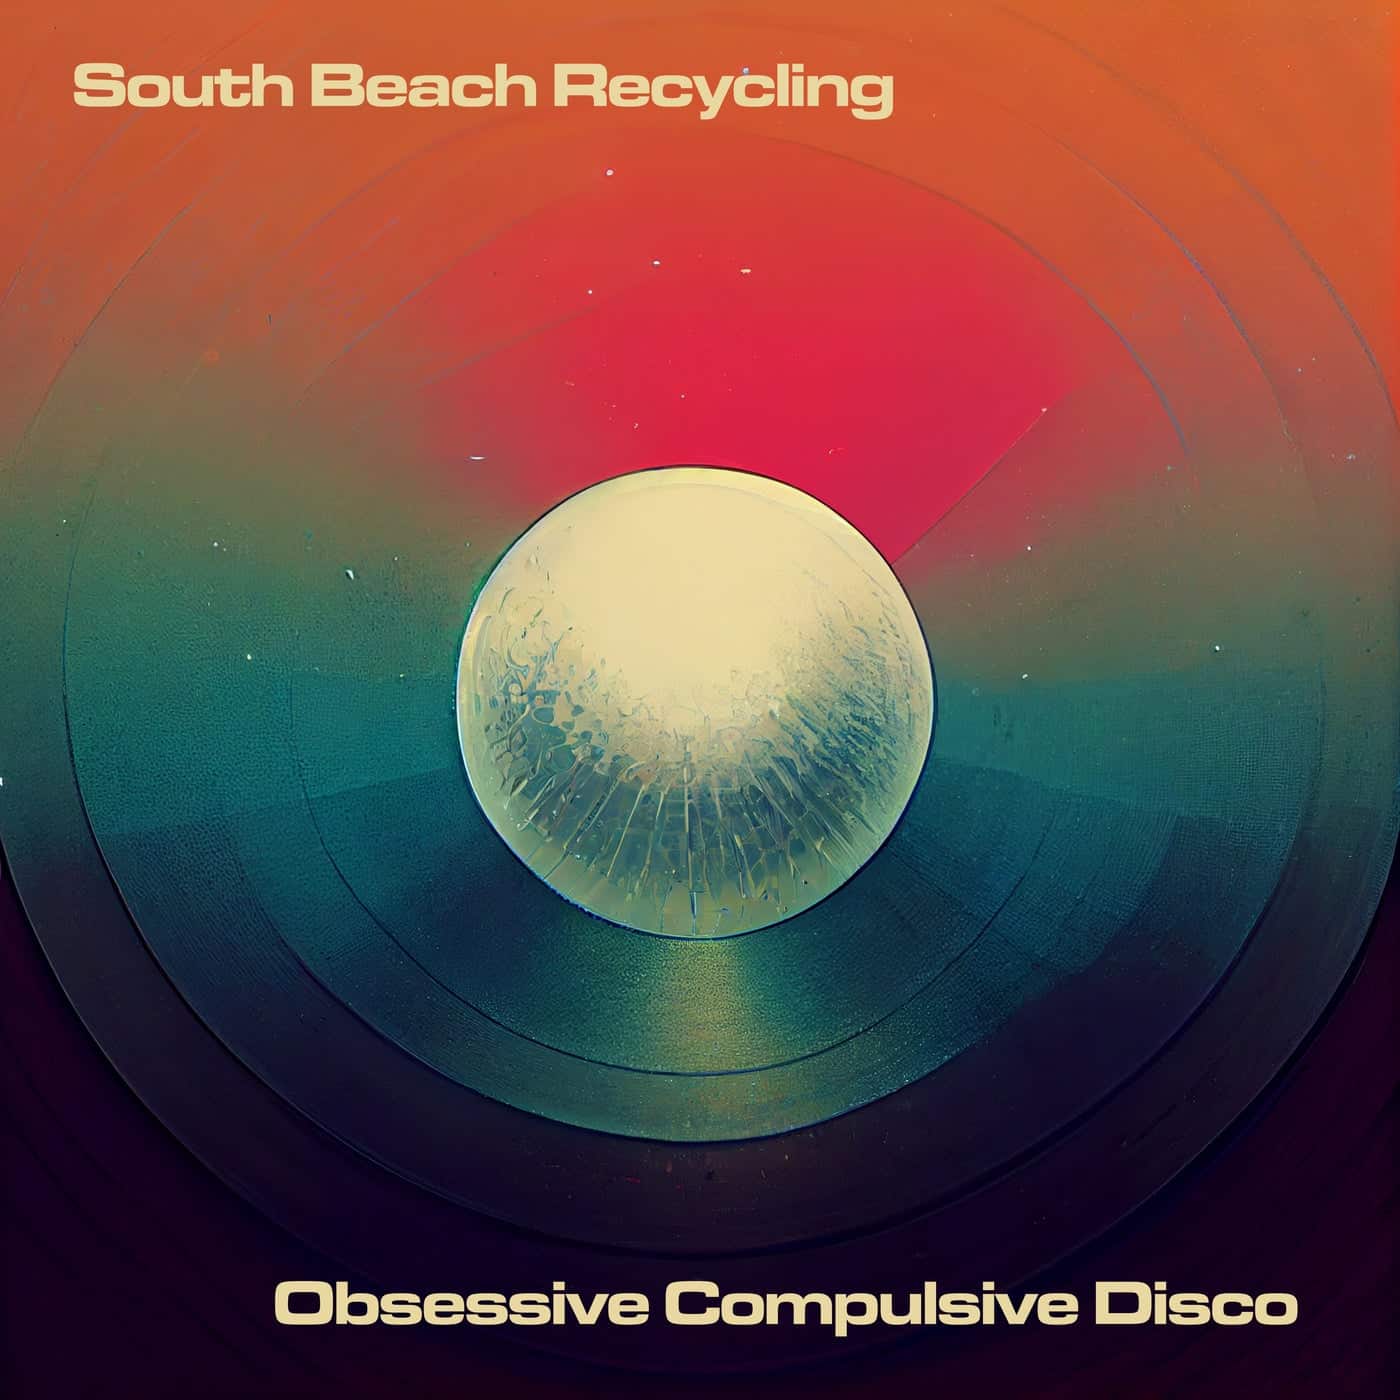 Download South Beach Recycling - Obsessive Compulsive Disco on Electrobuzz